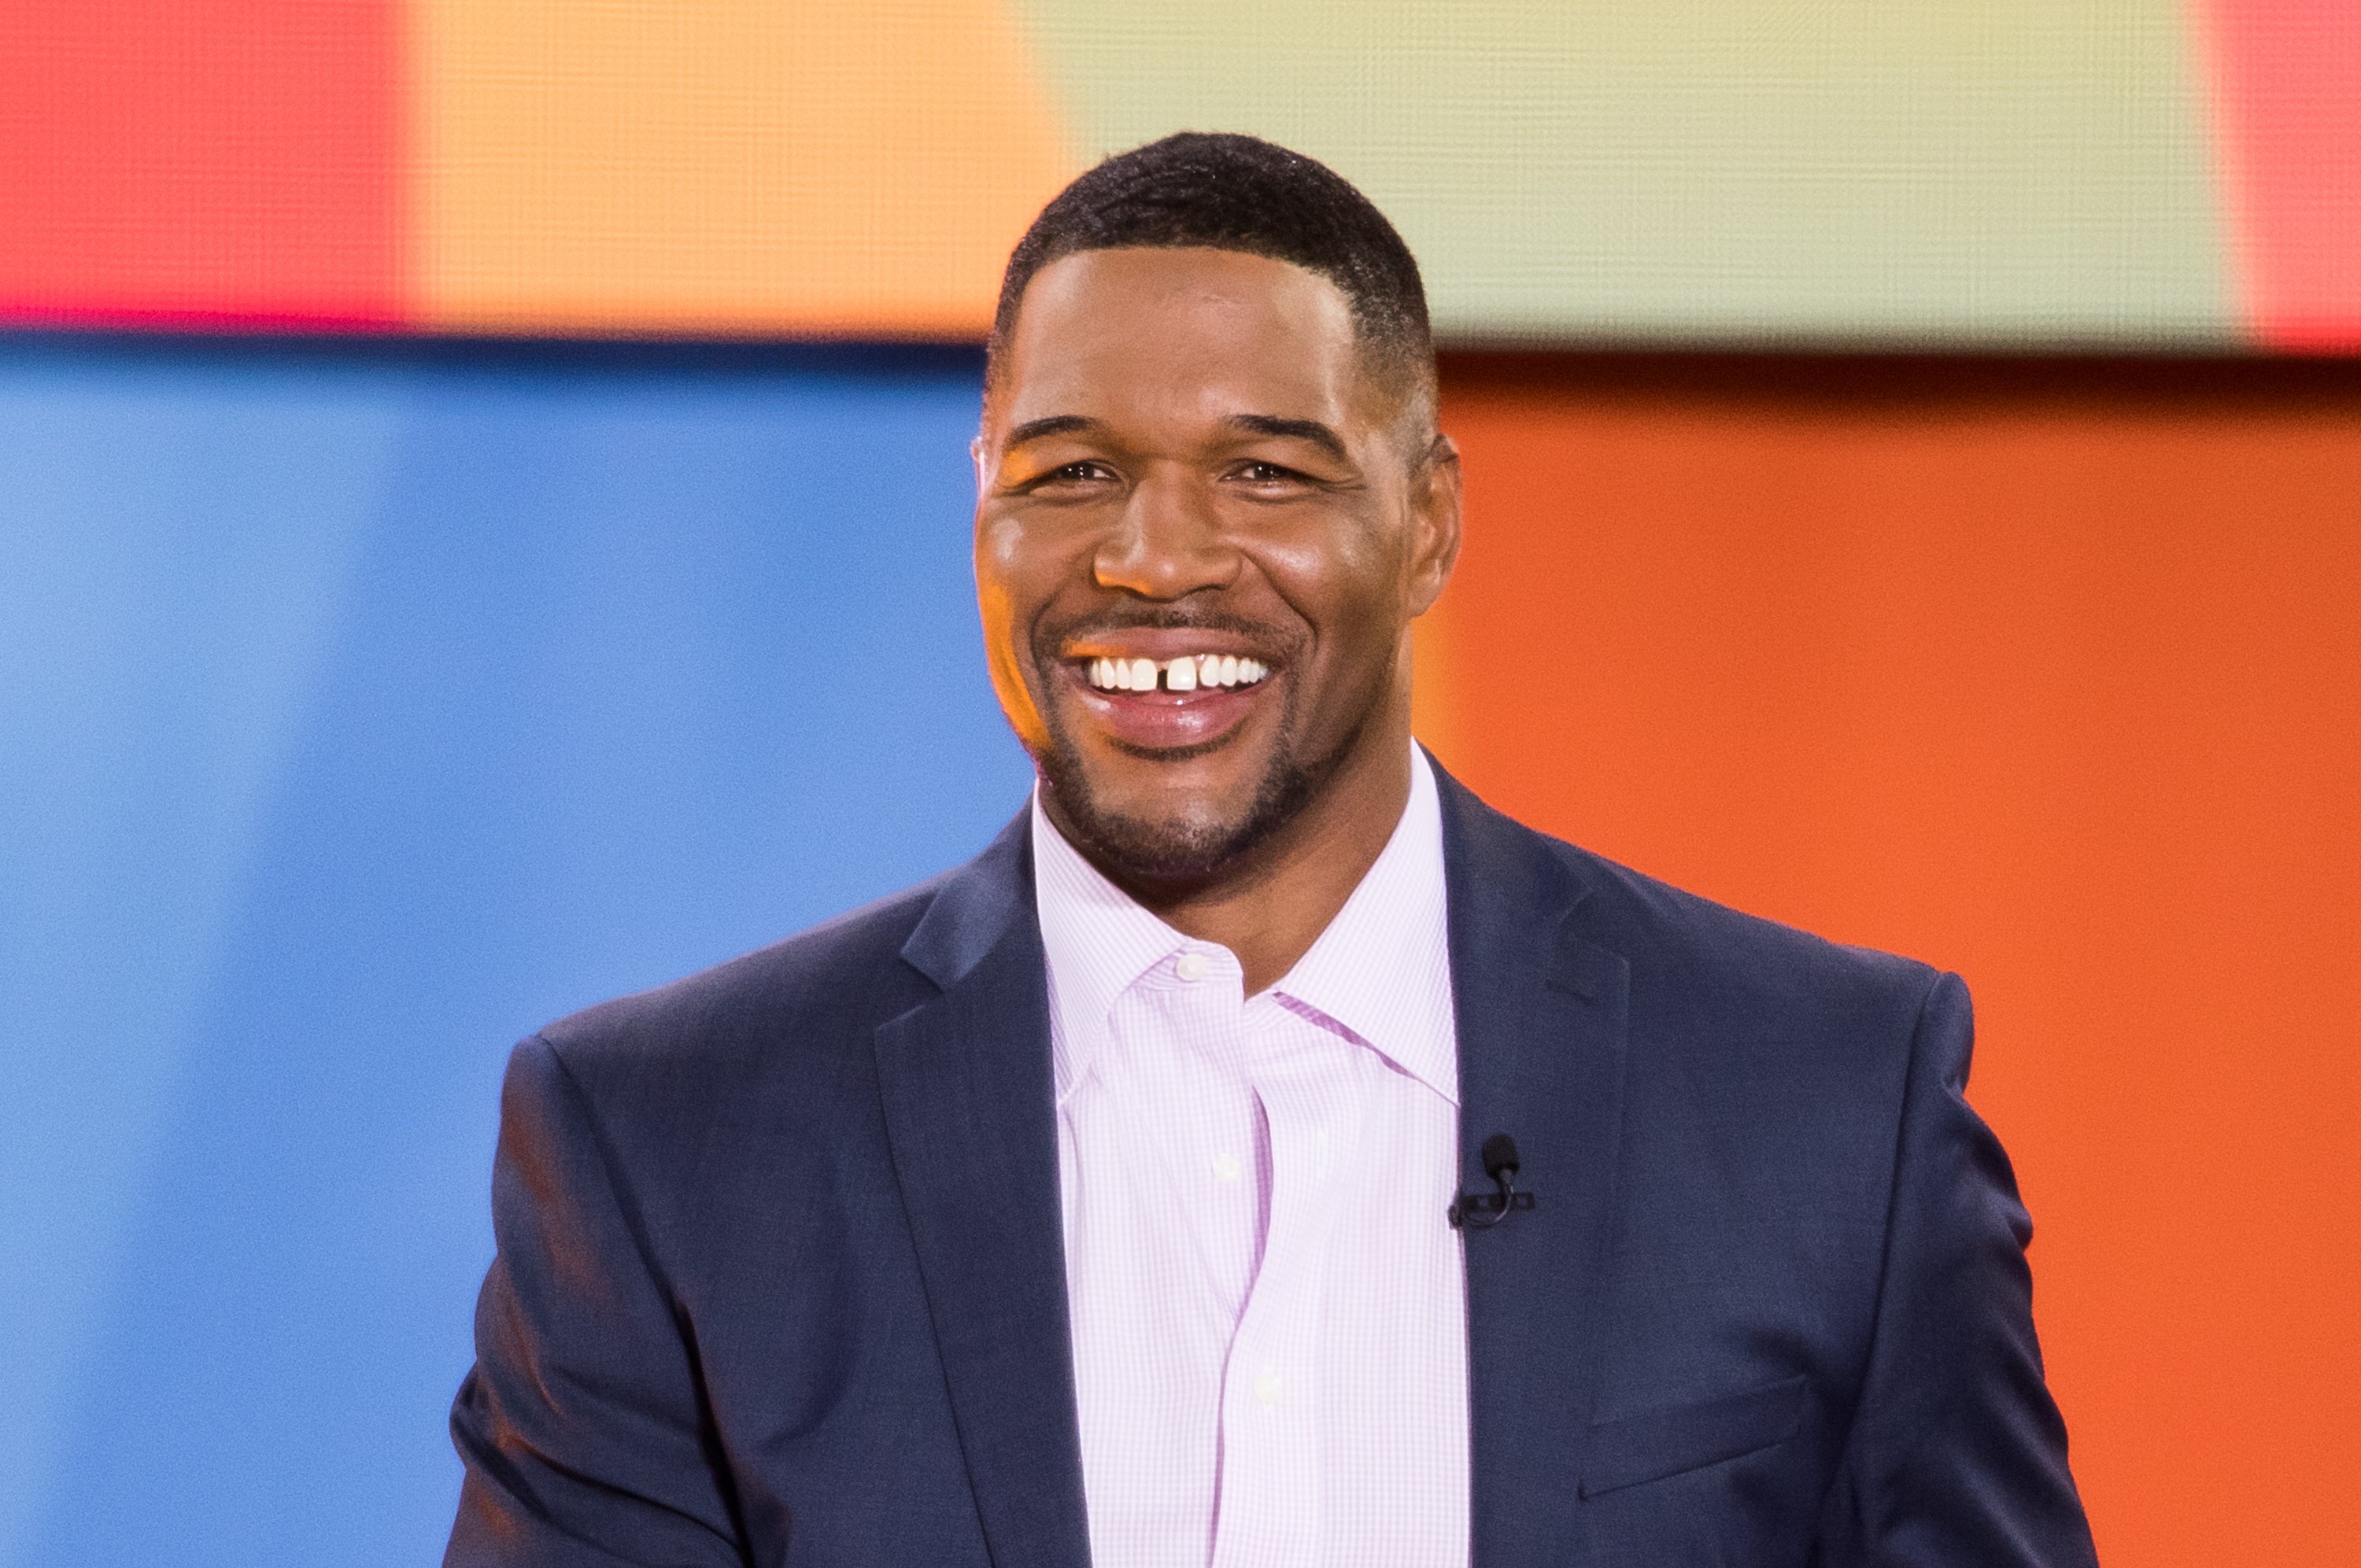 Michael Strahan on the set of ABC's "Good Morning America" on July 6, 2018. | Photo: Getty Images